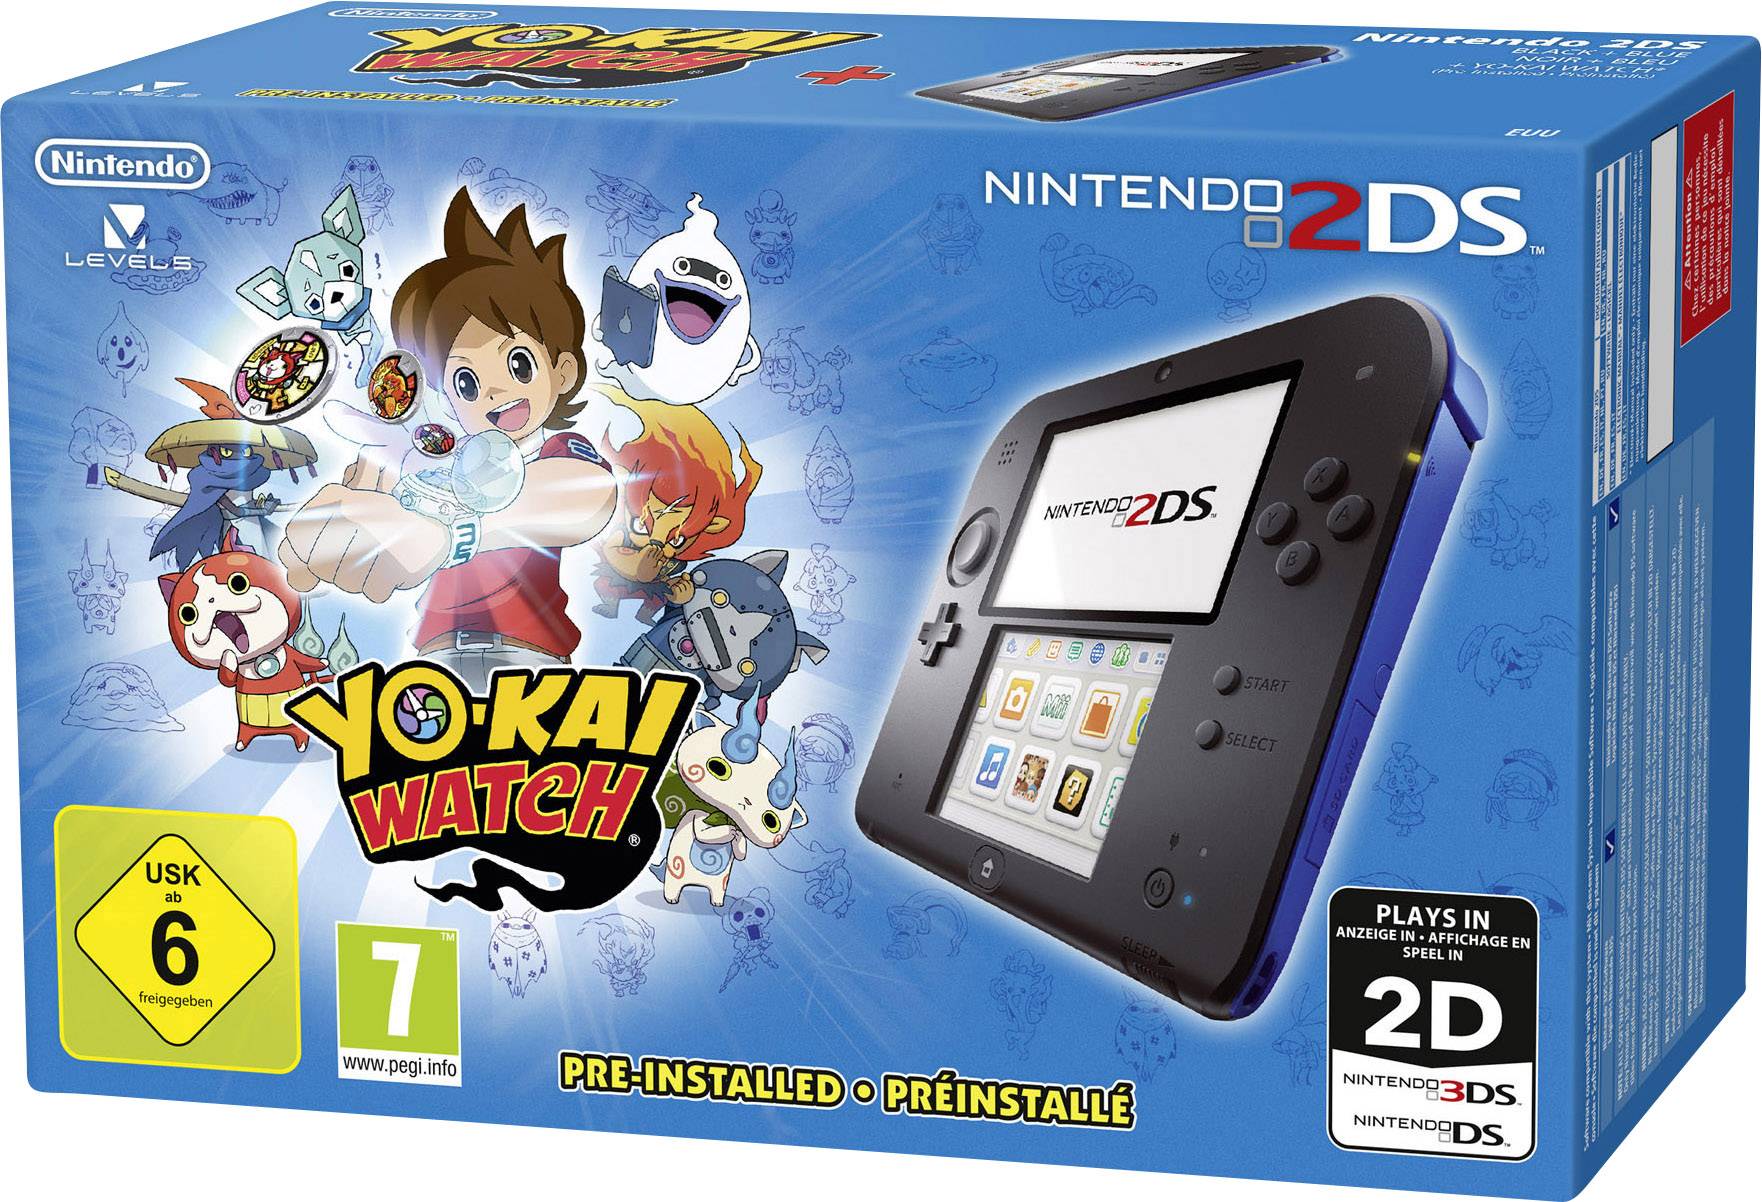 2ds black and blue